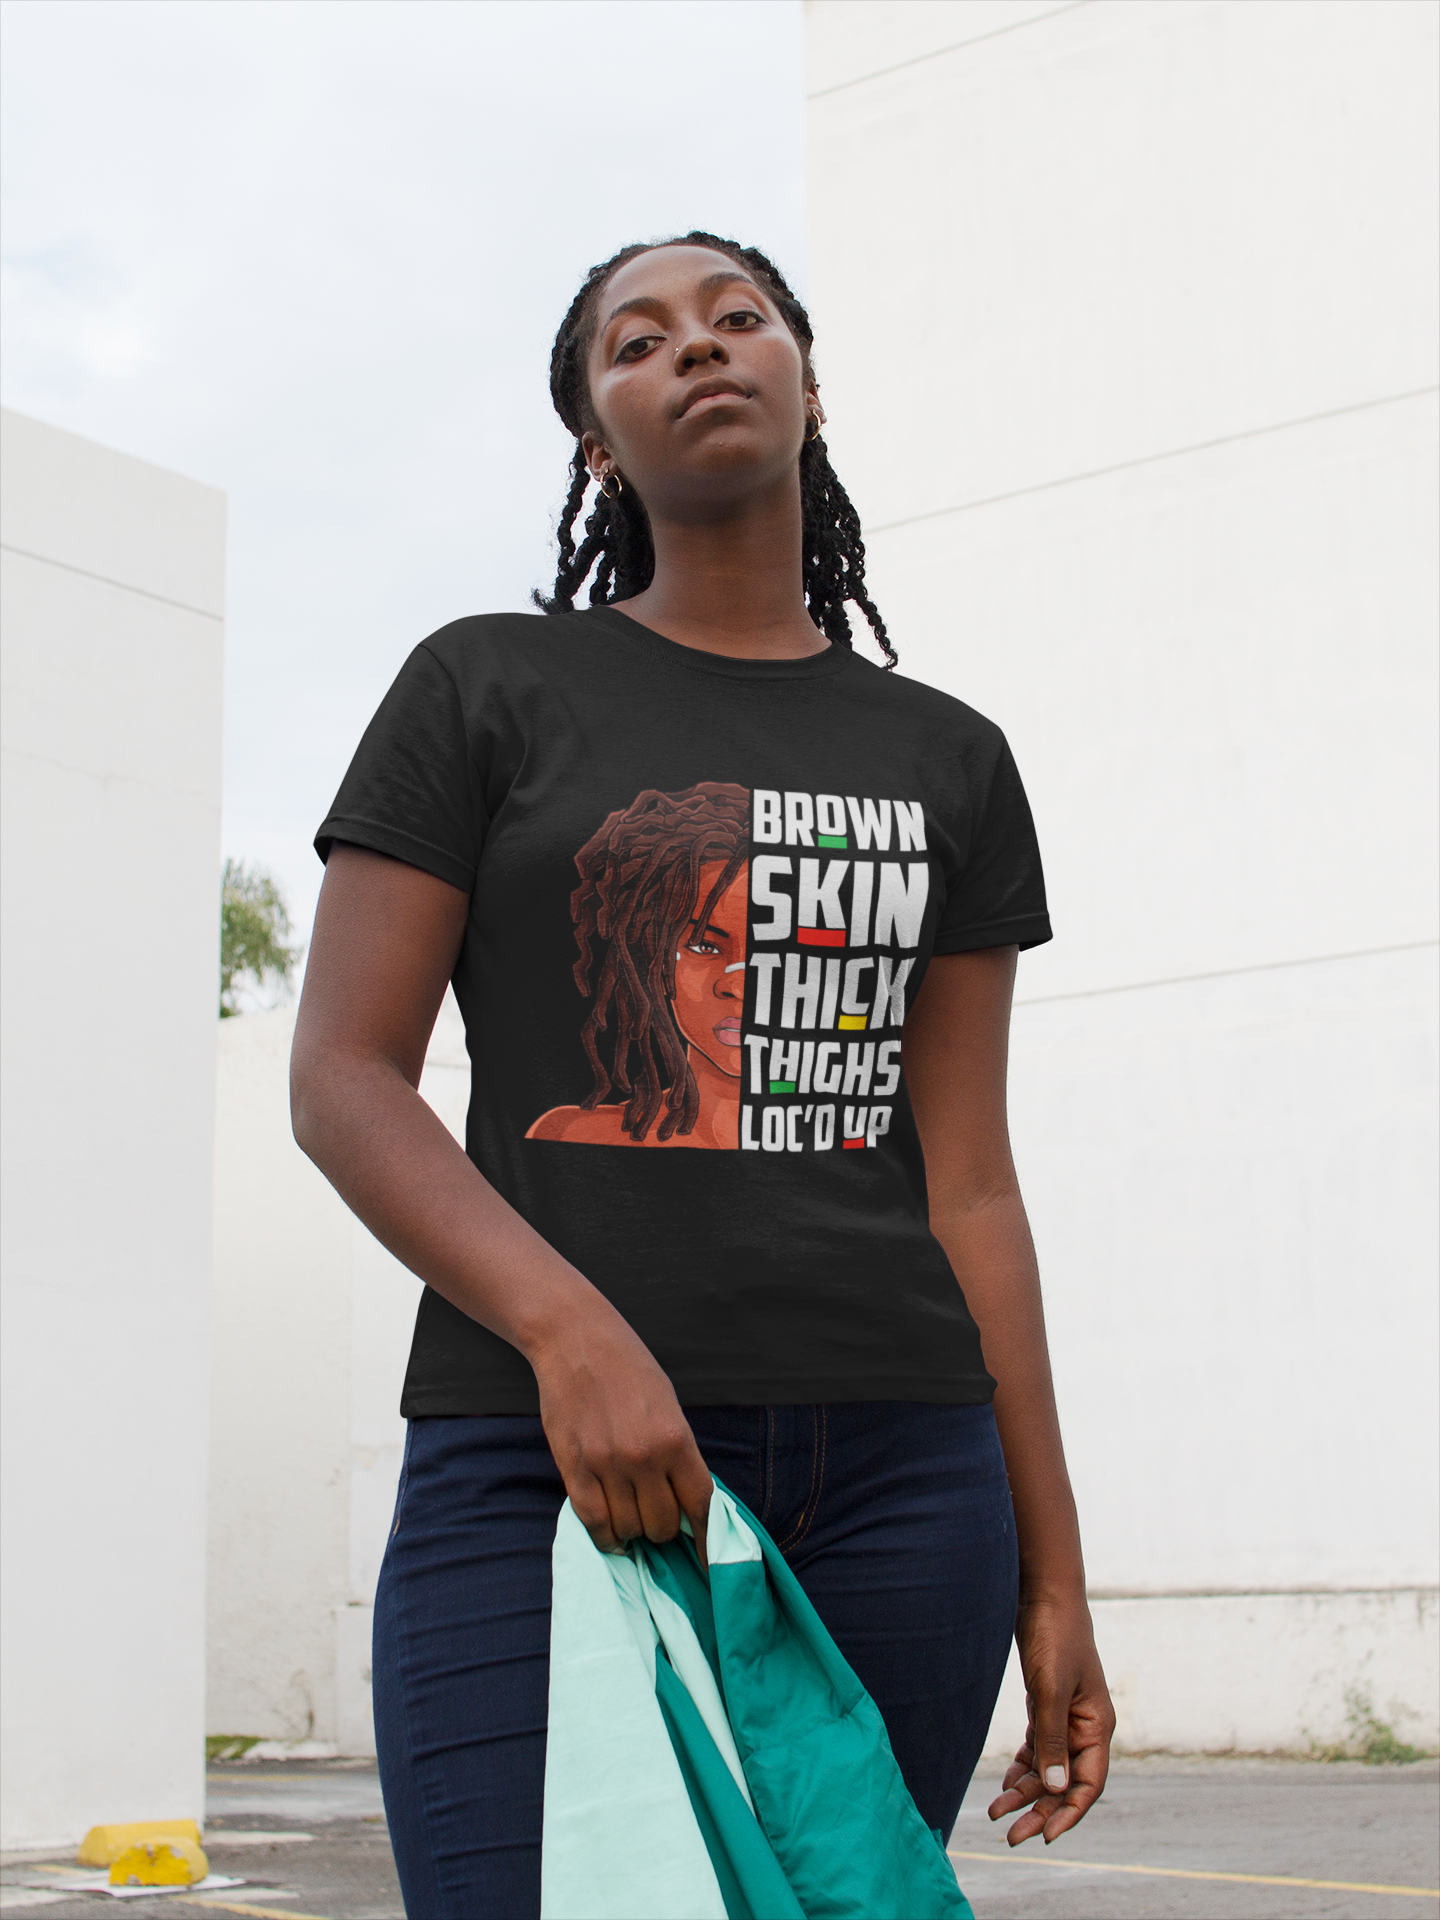 "BROWN & THICK" Afro Tee